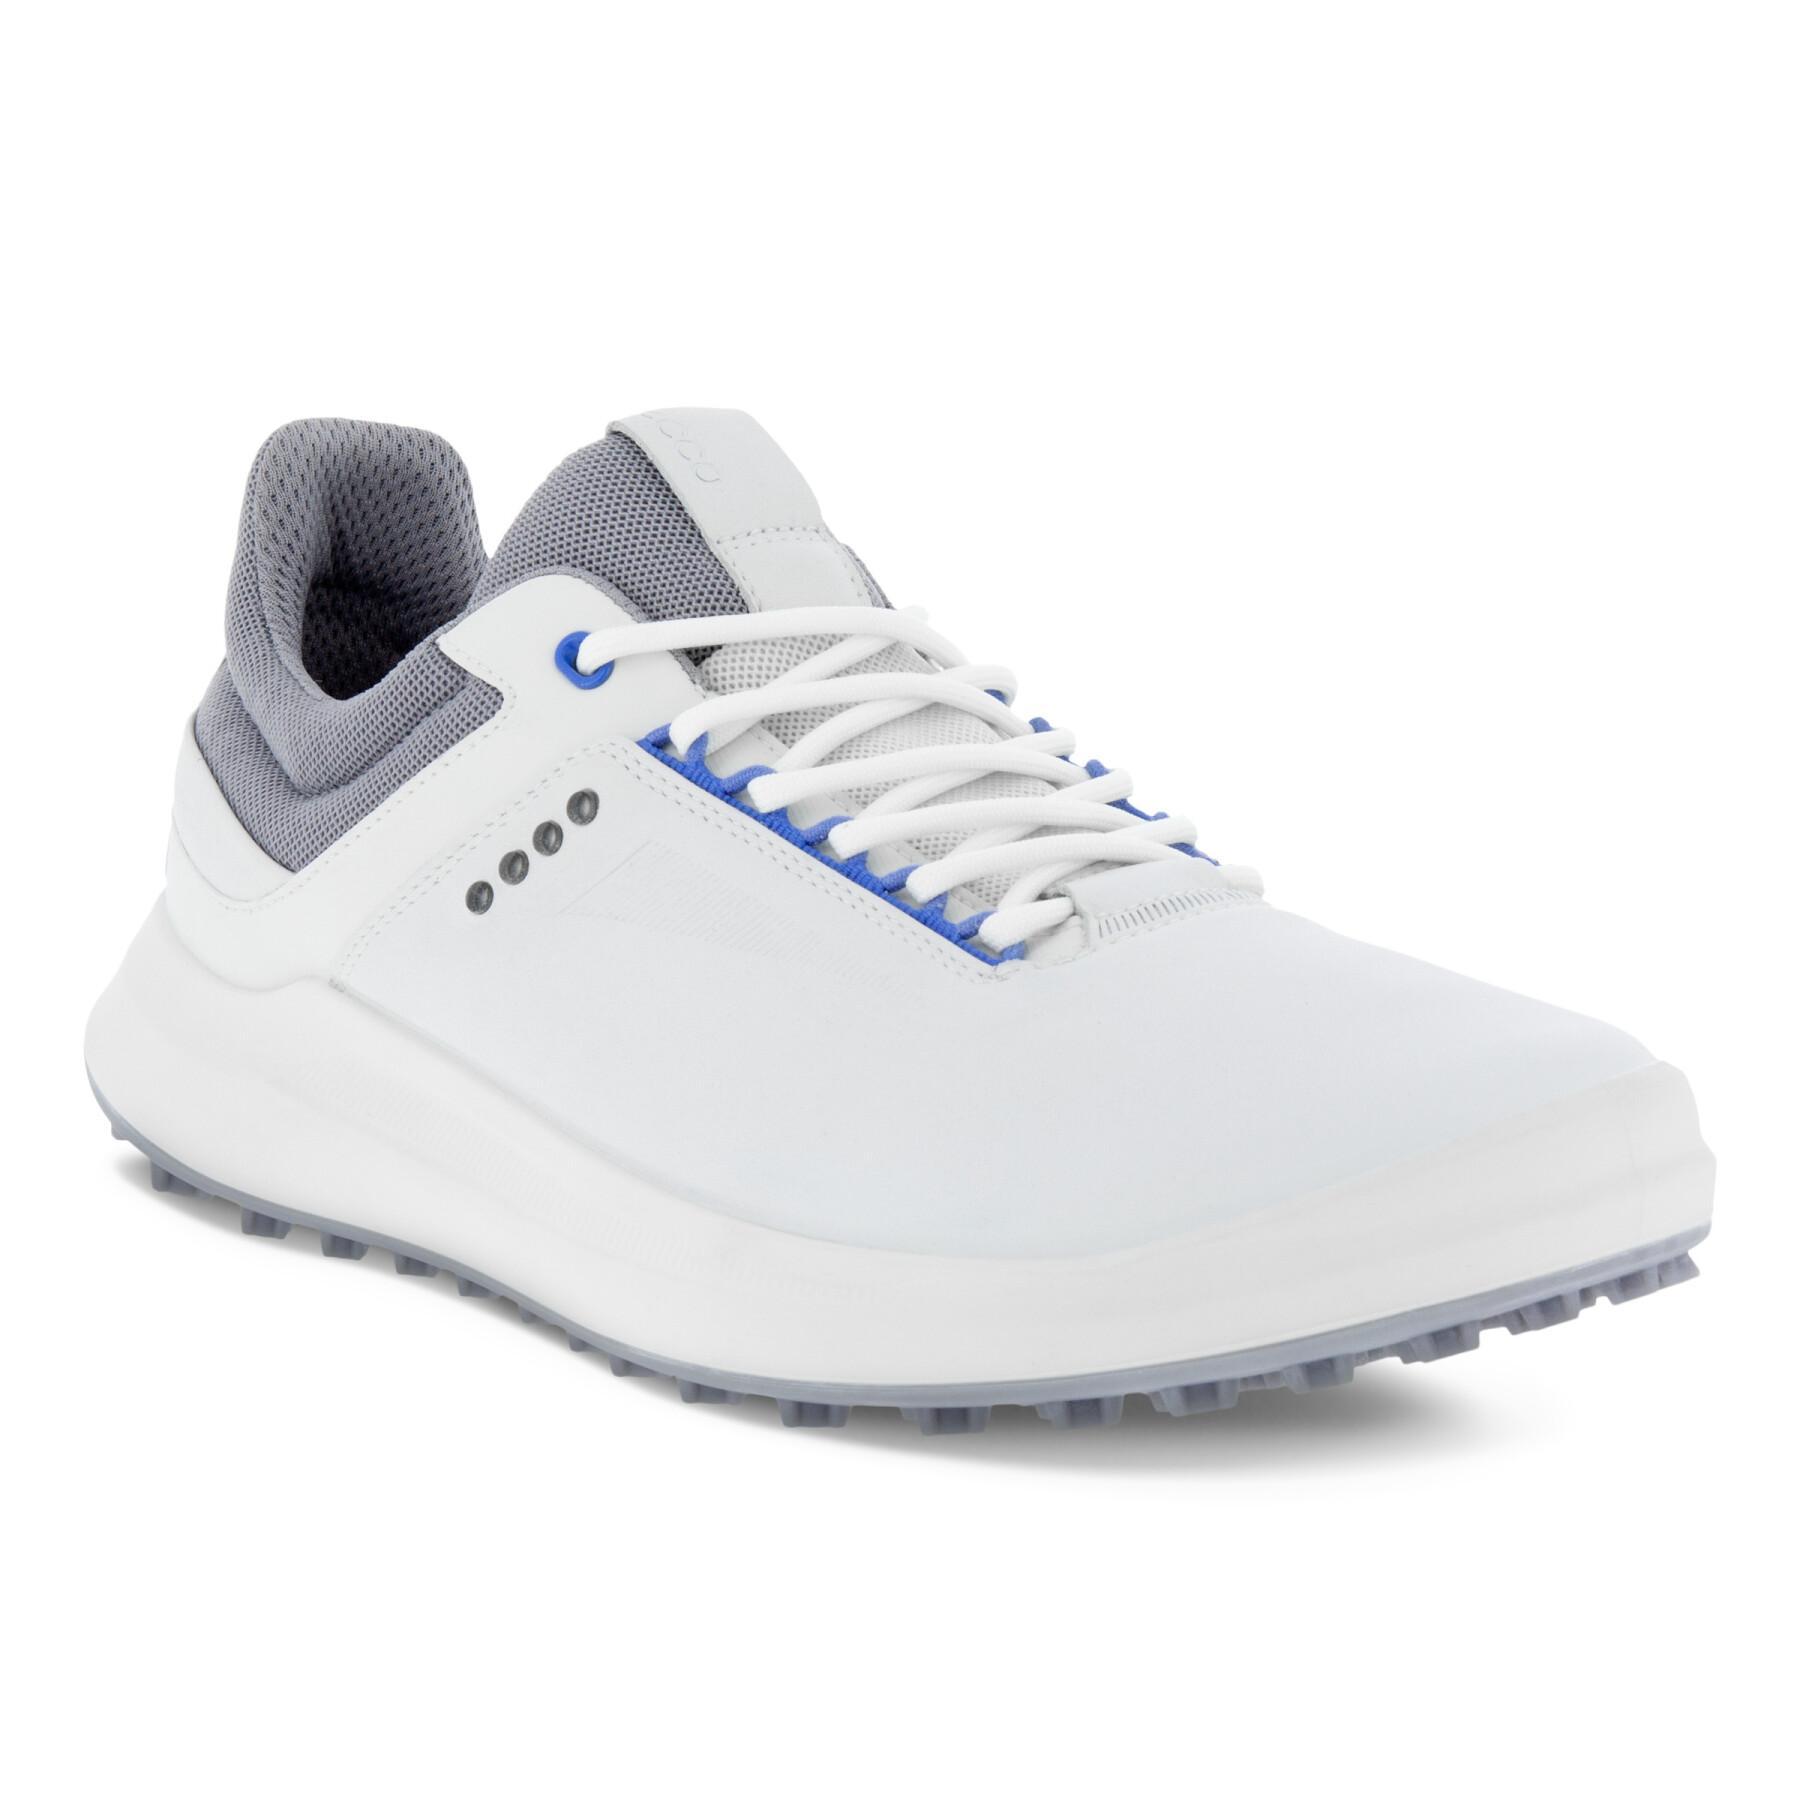 Spikeless golf shoes Ecco Core